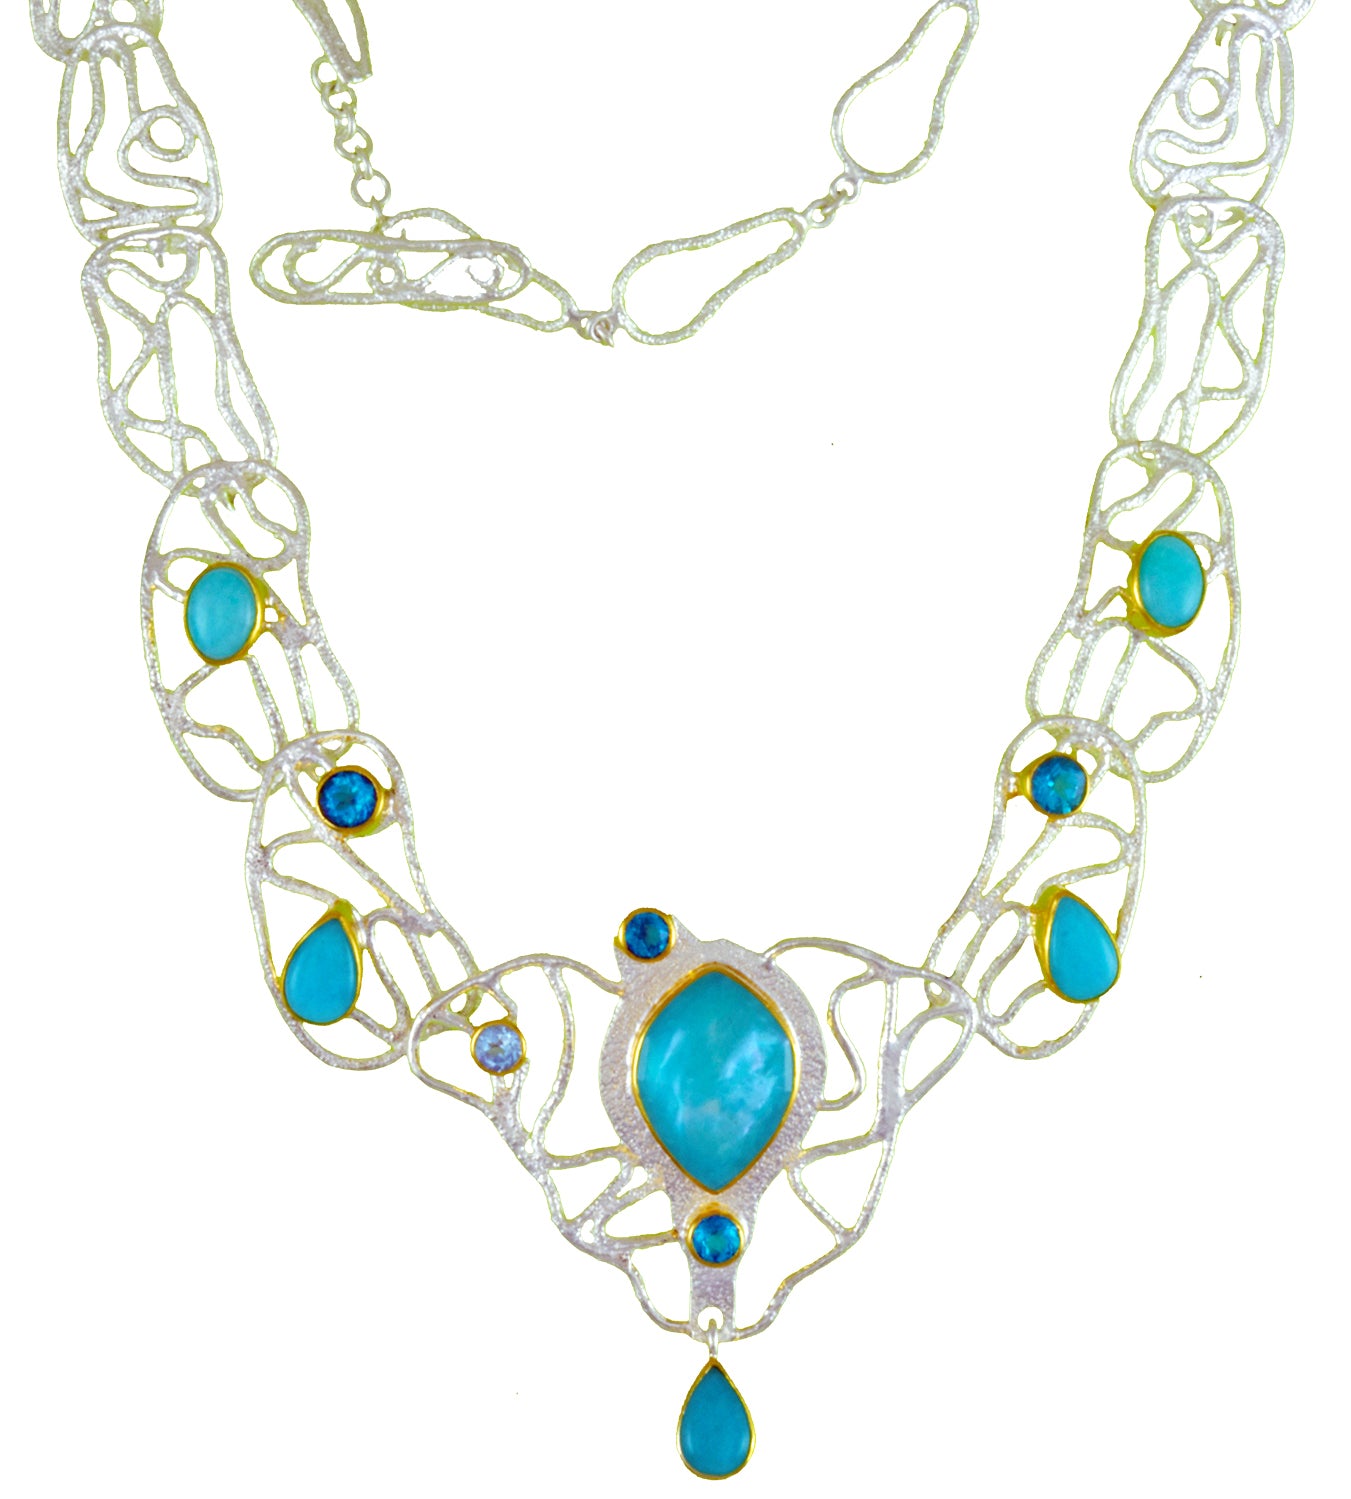 Sterling Silver and 22K Gold Vermeil Necklace with Amazonite + checkerboard cut crystal quartz+ Mother of Pearl, Amazonite, Paraiba Topaz and Sky Blue Topaz